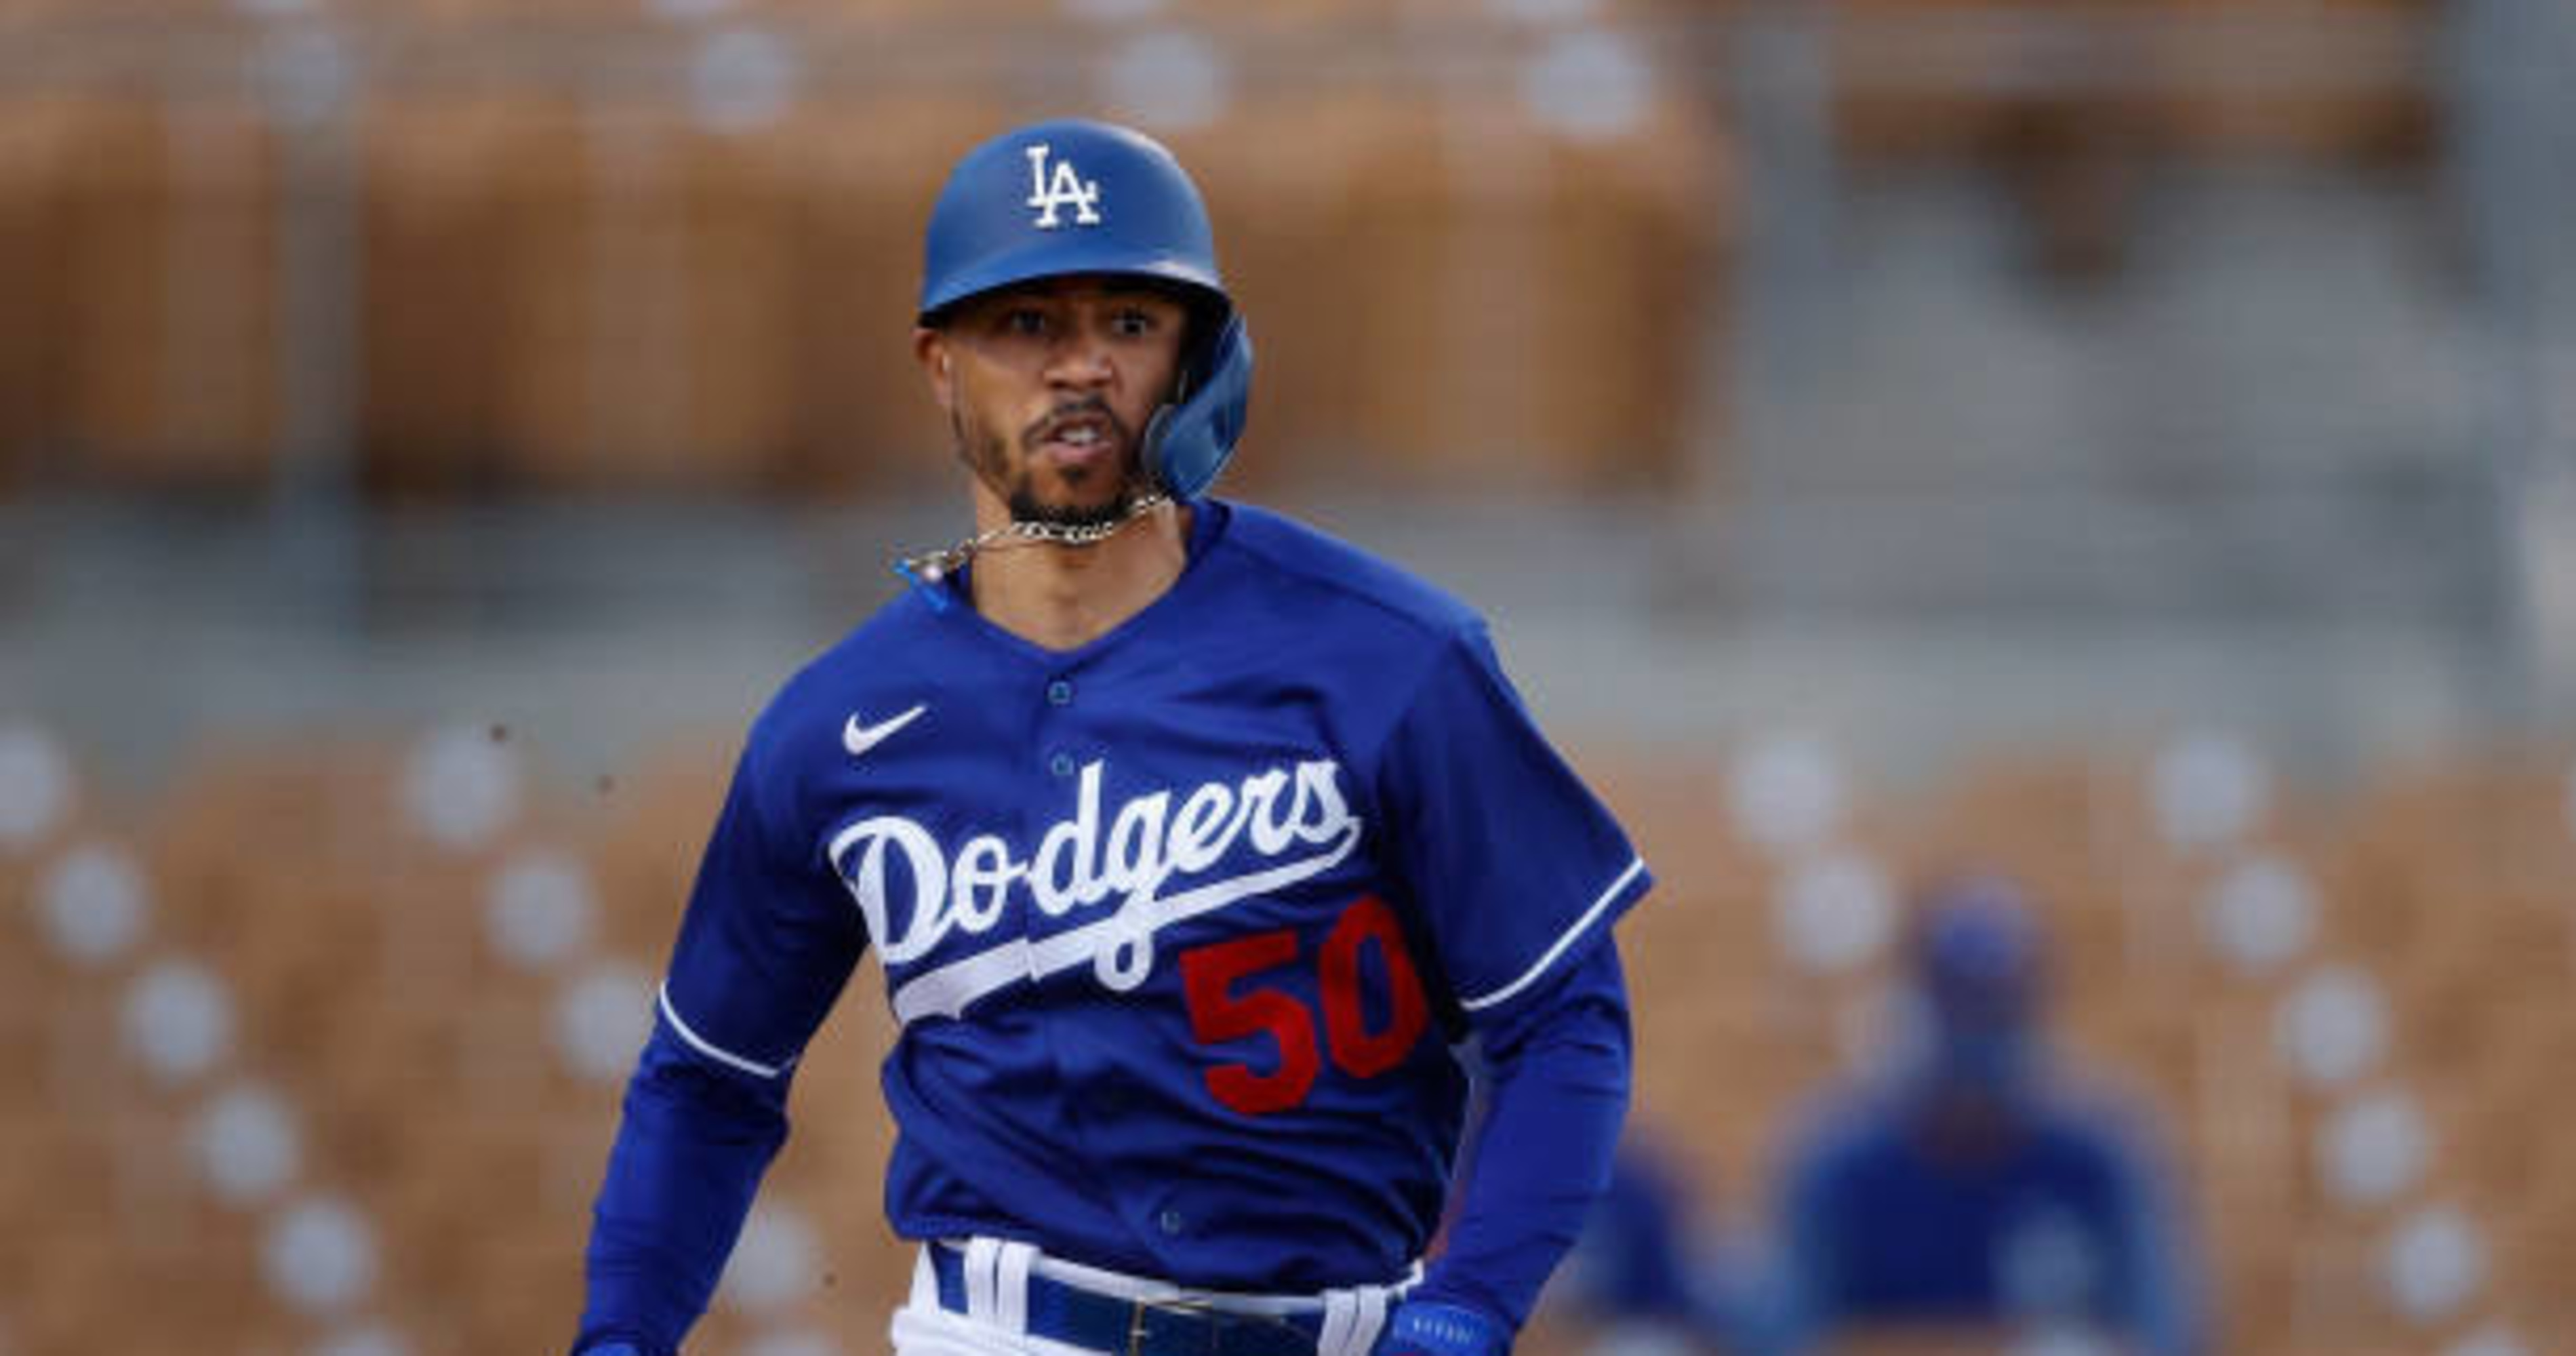 Dodgers News: Mookie Betts Not Paying Attention to Stats, 'I Just